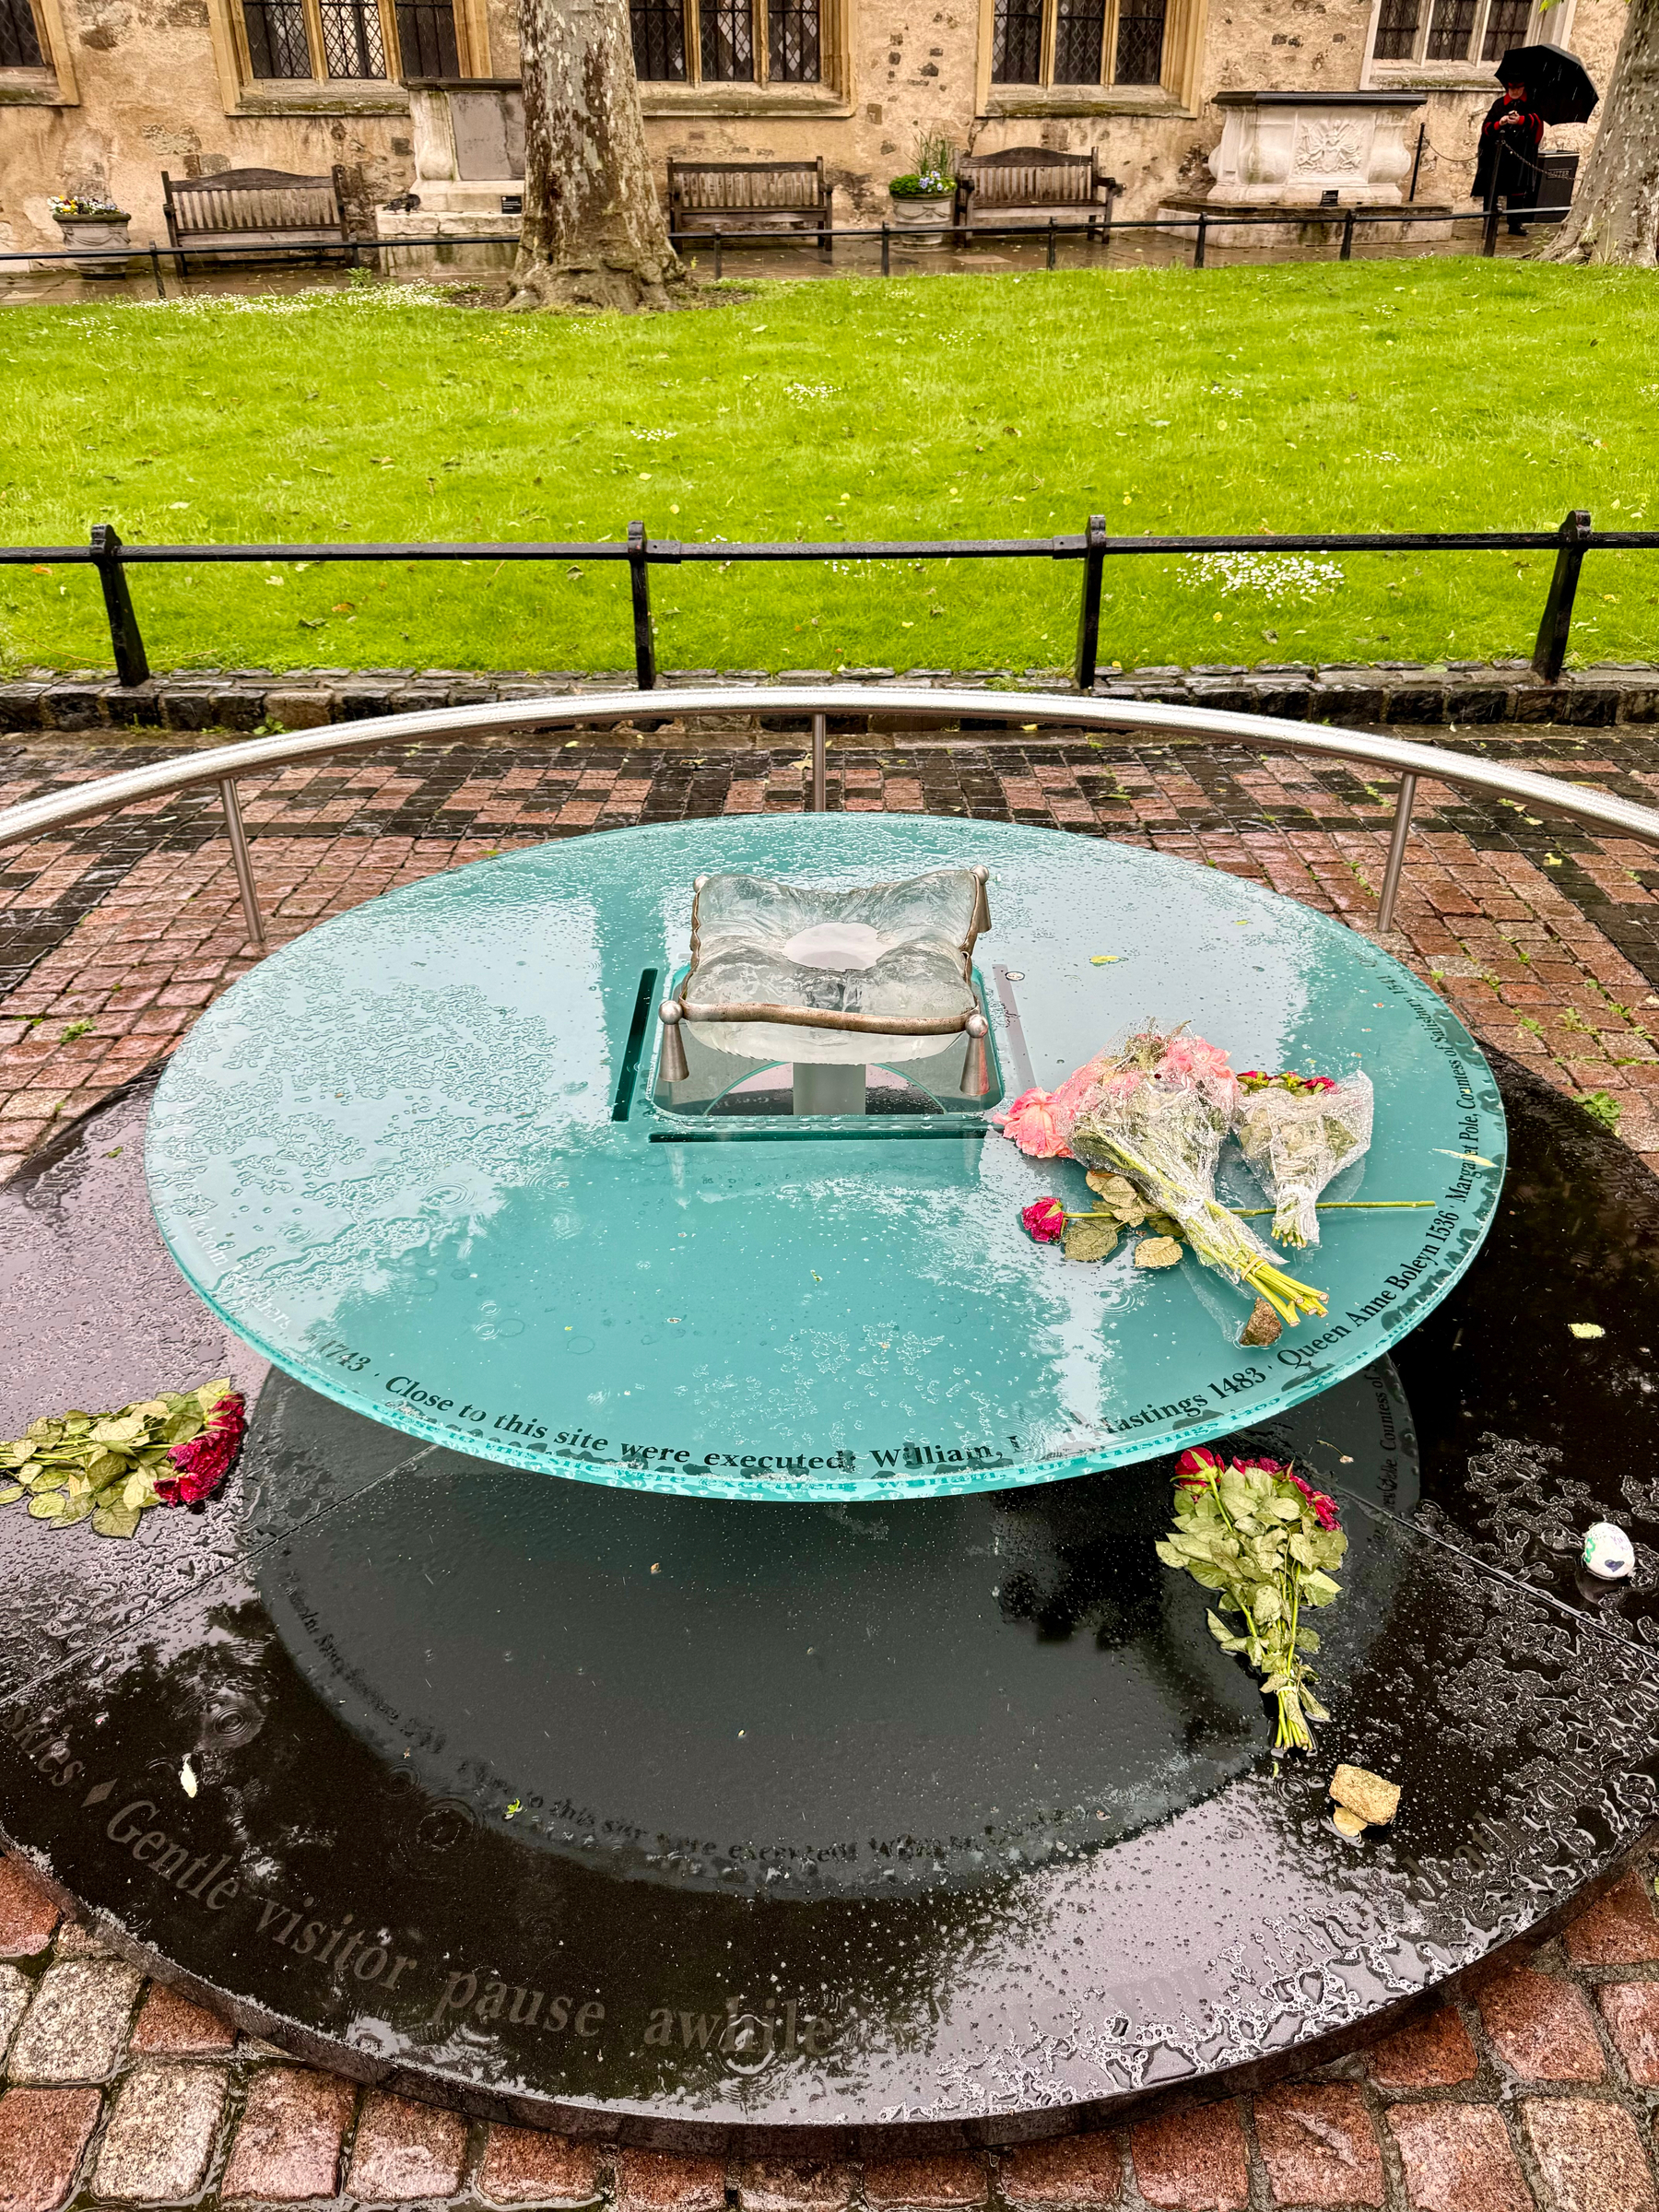 A glass memorial plaque on wet ground surrounded by a metal railing with raindrops and flowers laid on top, inscribed with text commemorating the execution site of historical figures, including Anne Boleyn. 